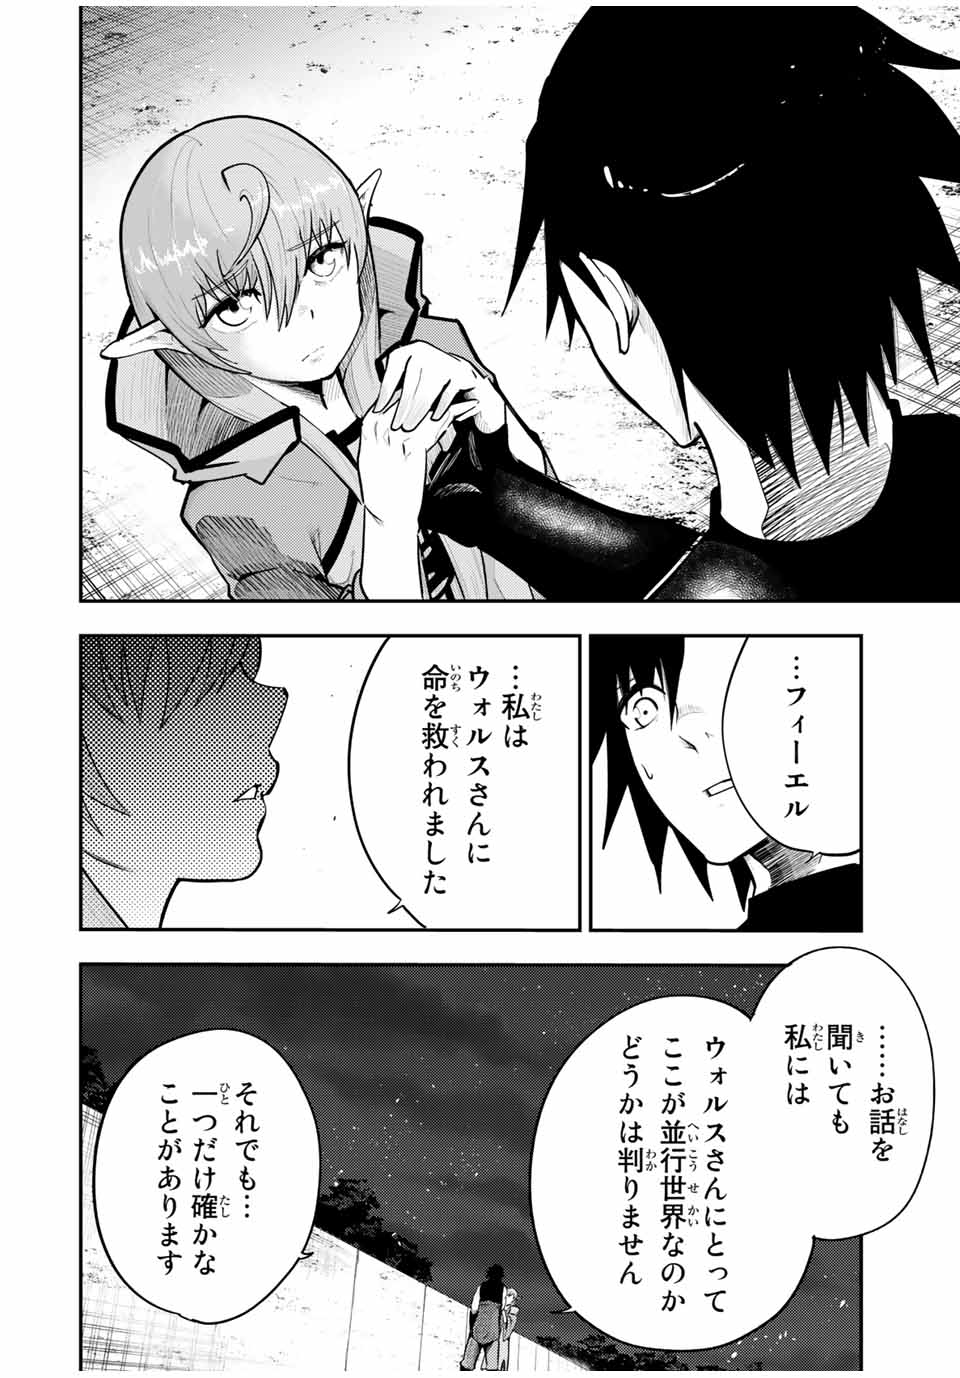 the strongest former prince-; 奴隷転生 ～その奴隷、最強の元王子につき～ 第50話 - Page 6